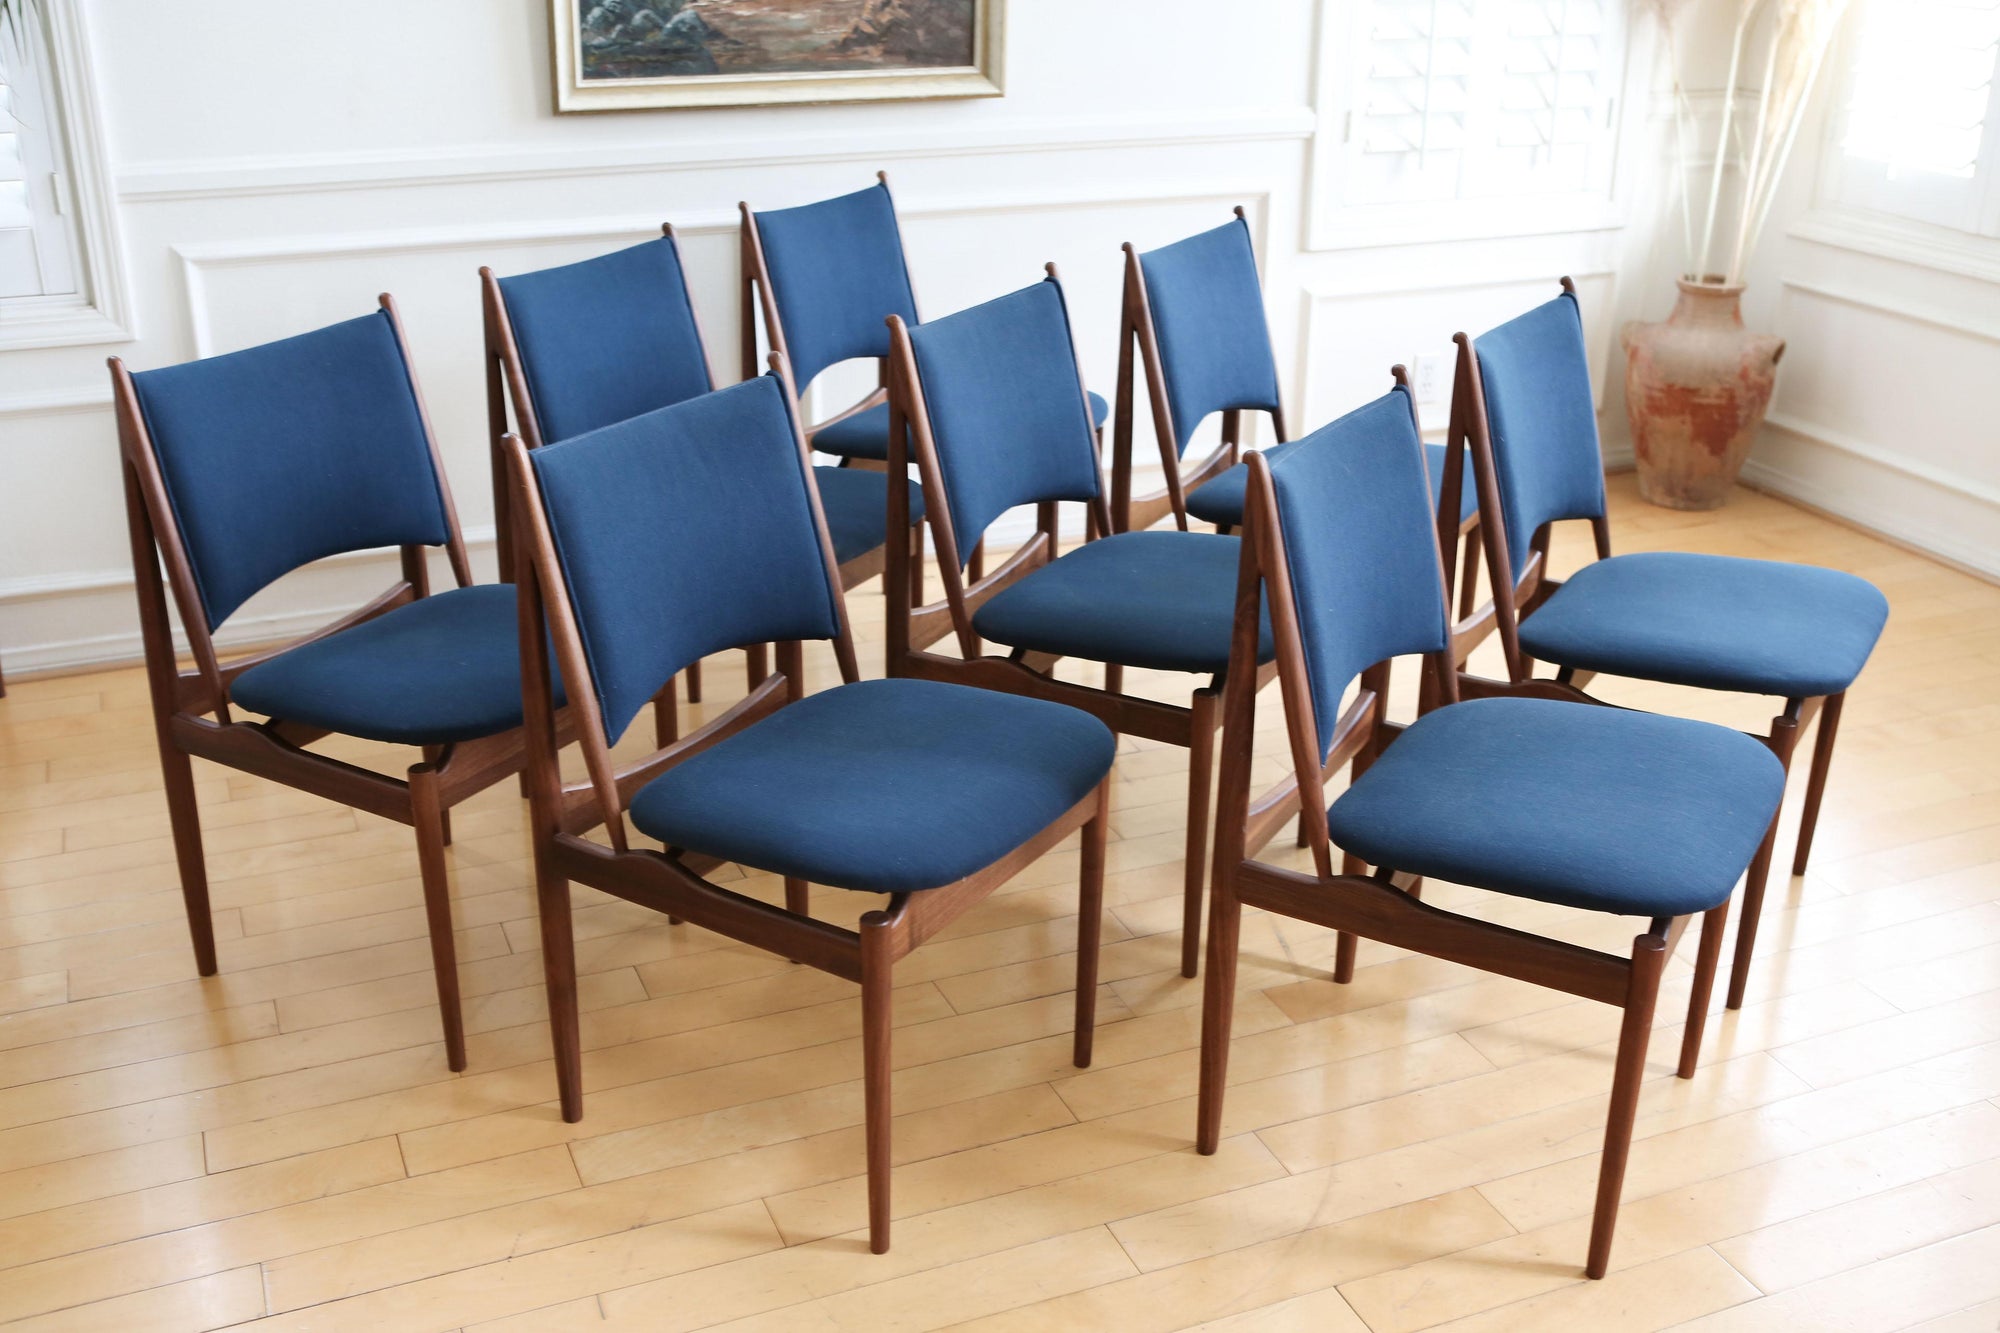 Mid Century Modern Teak Dining Chairs in Navy Blue - Set of 8 No 627 - ShopGoldenPineapple